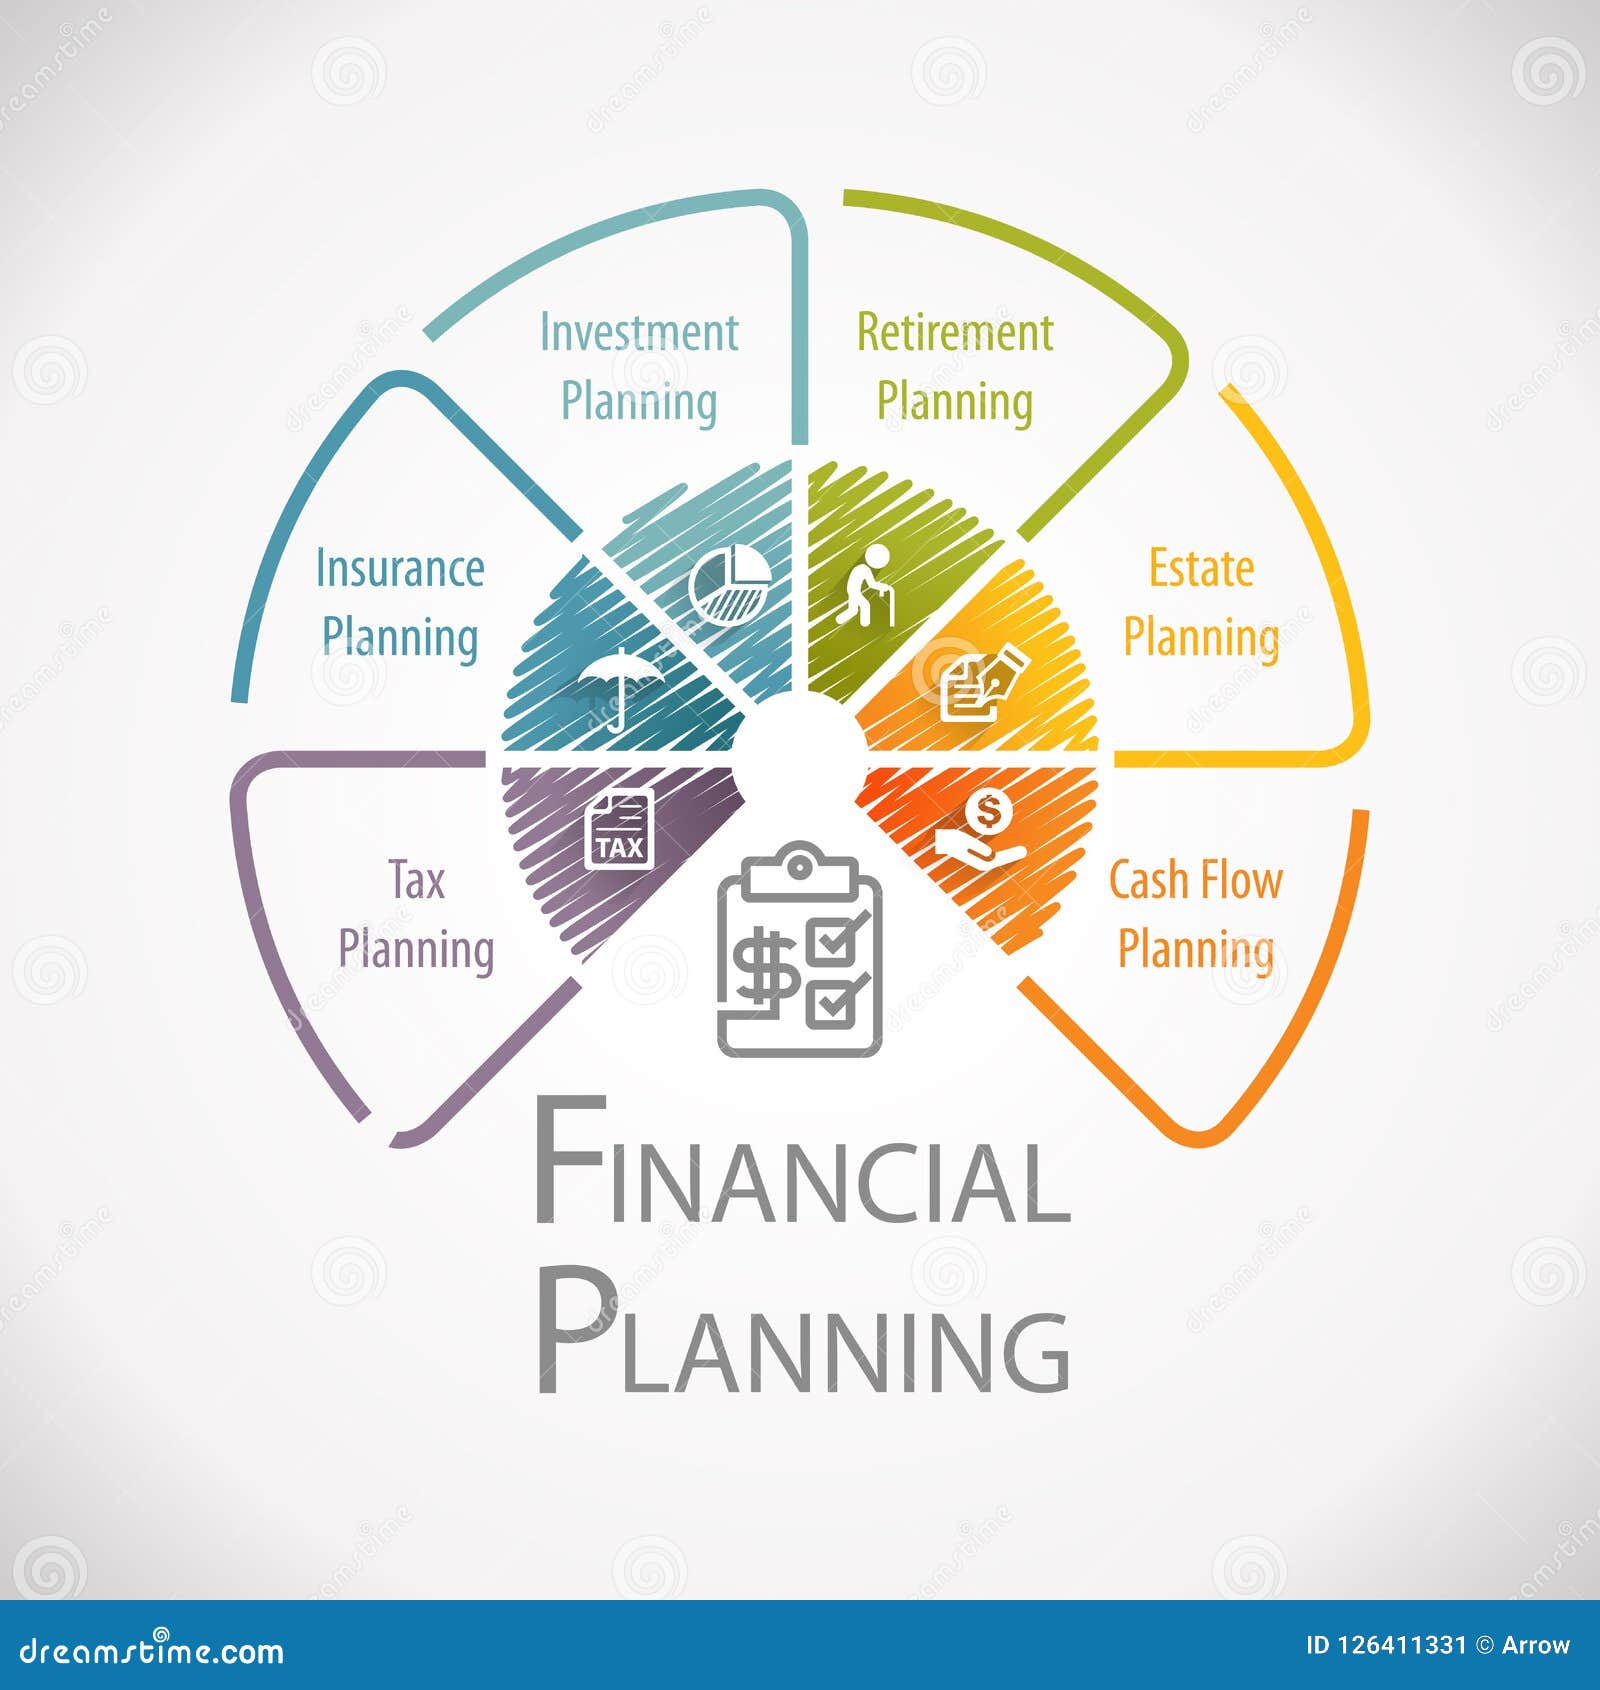 Financial Planning Wheel Stock Illustrations – 237 Financial Planning Wheel Stock Illustrations, Vectors & Clipart - Dreamstime